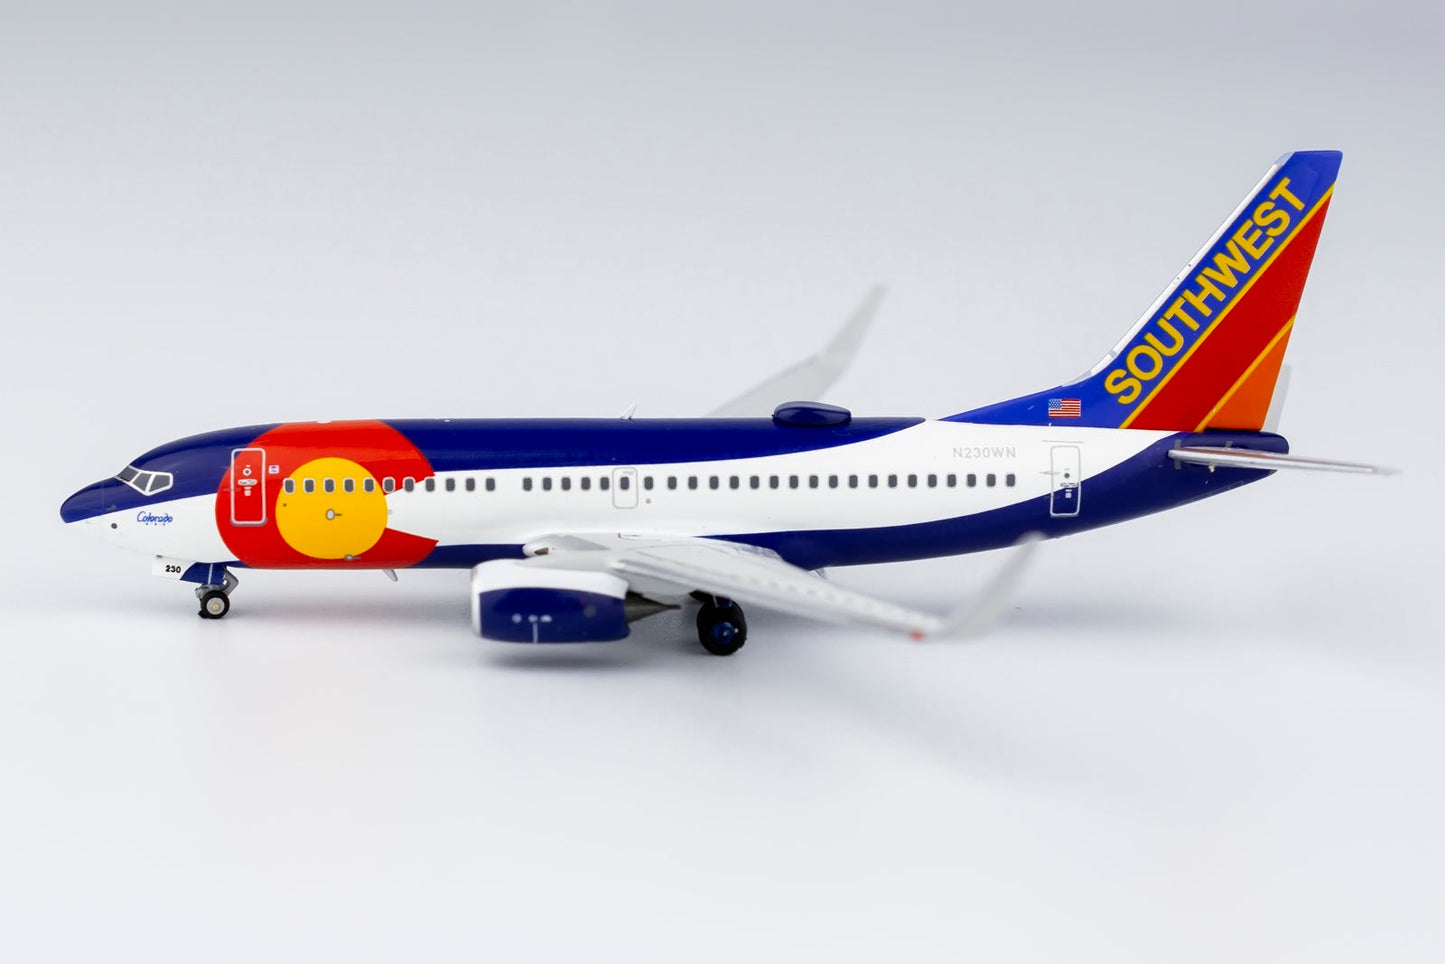 1/400 Southwest Airlines B 737-700/w "Colorado One/Canyon Blue" NG Models 77020